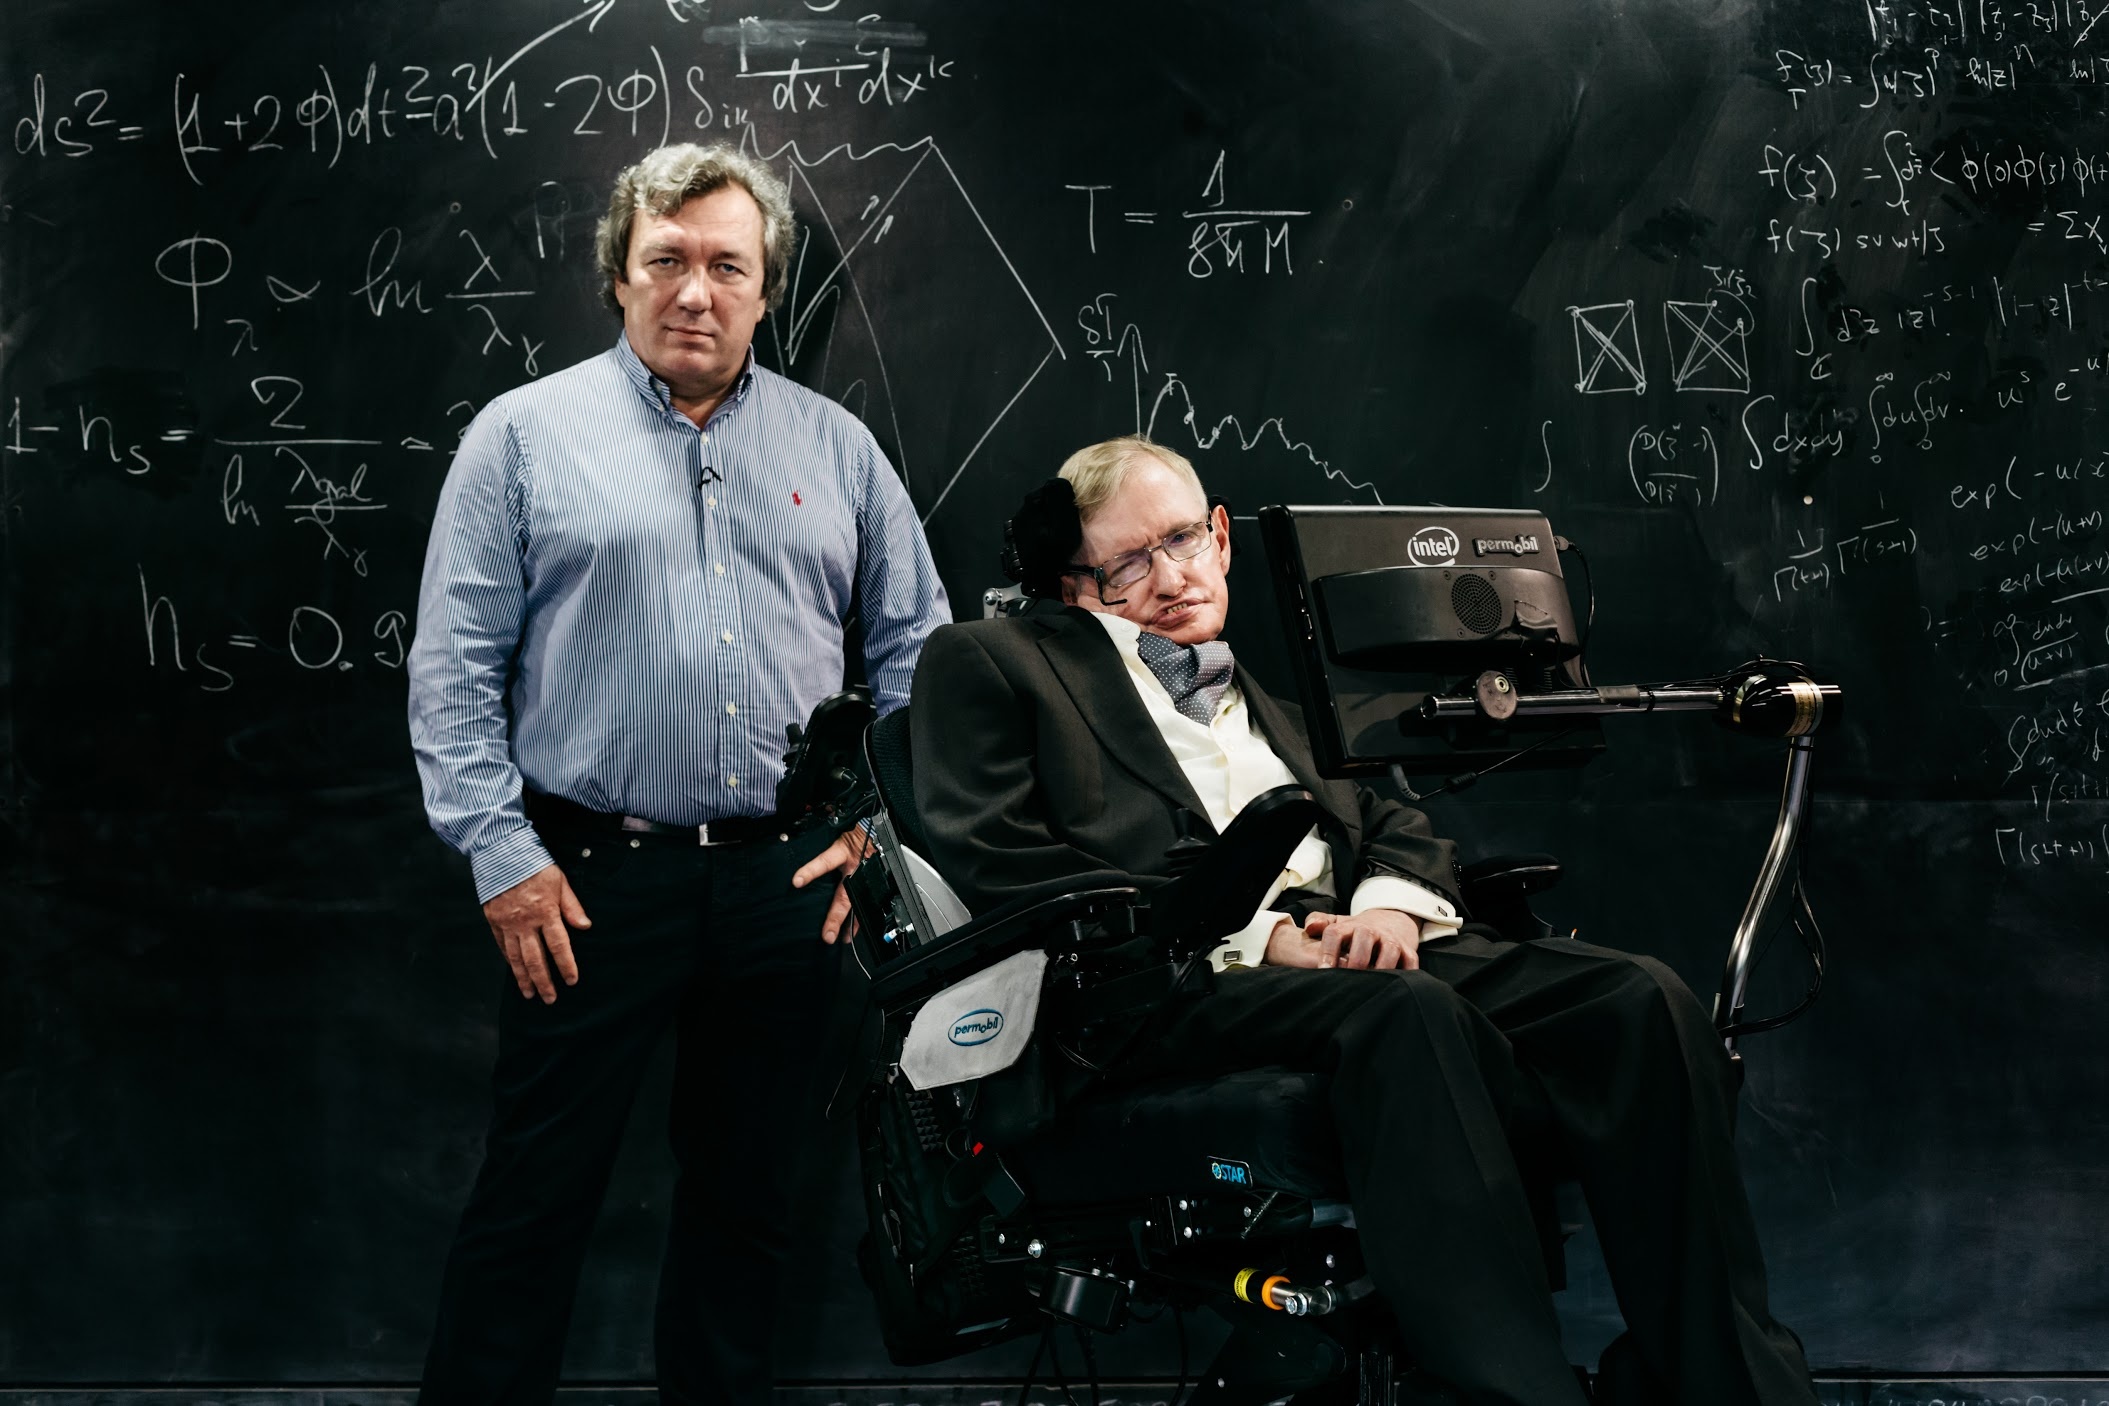 Man of value, Stephen Hawking tribute, Extraordinary physicist, Contribution to science, 2110x1410 HD Desktop